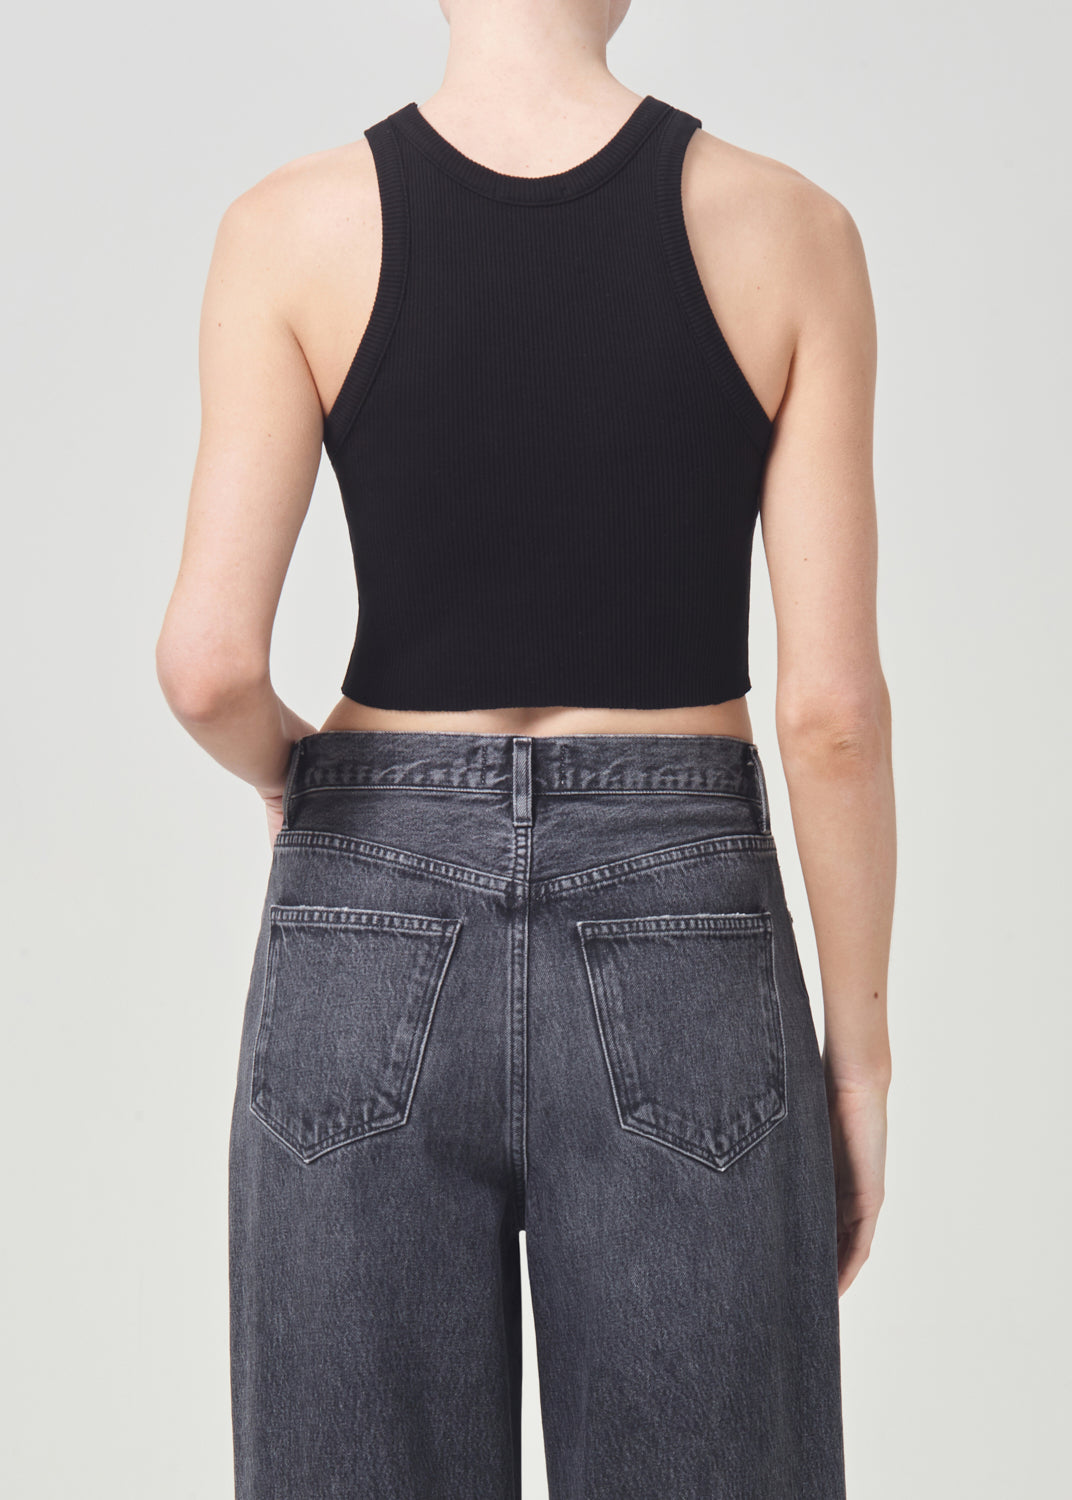 Cropped Bailey Tank in Black back